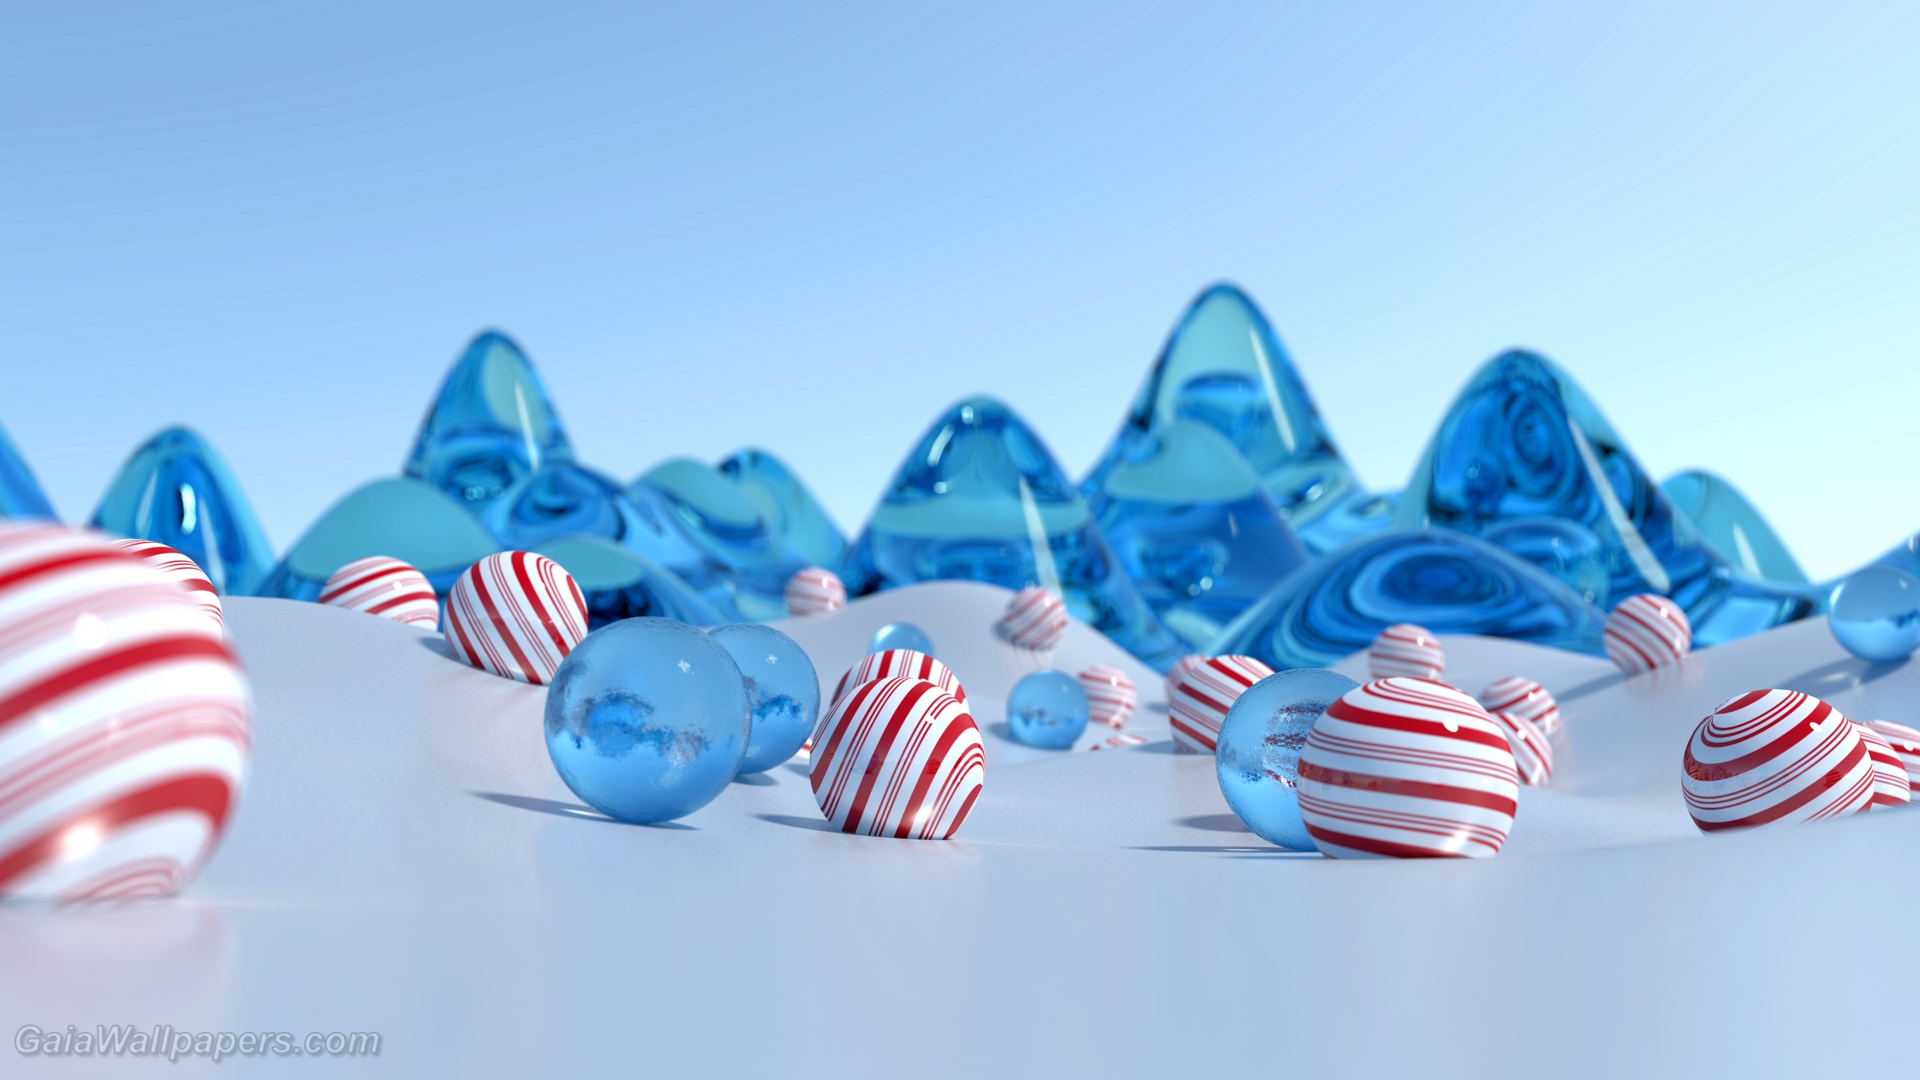 Candy pearls in the frosty land - Free desktop wallpapers